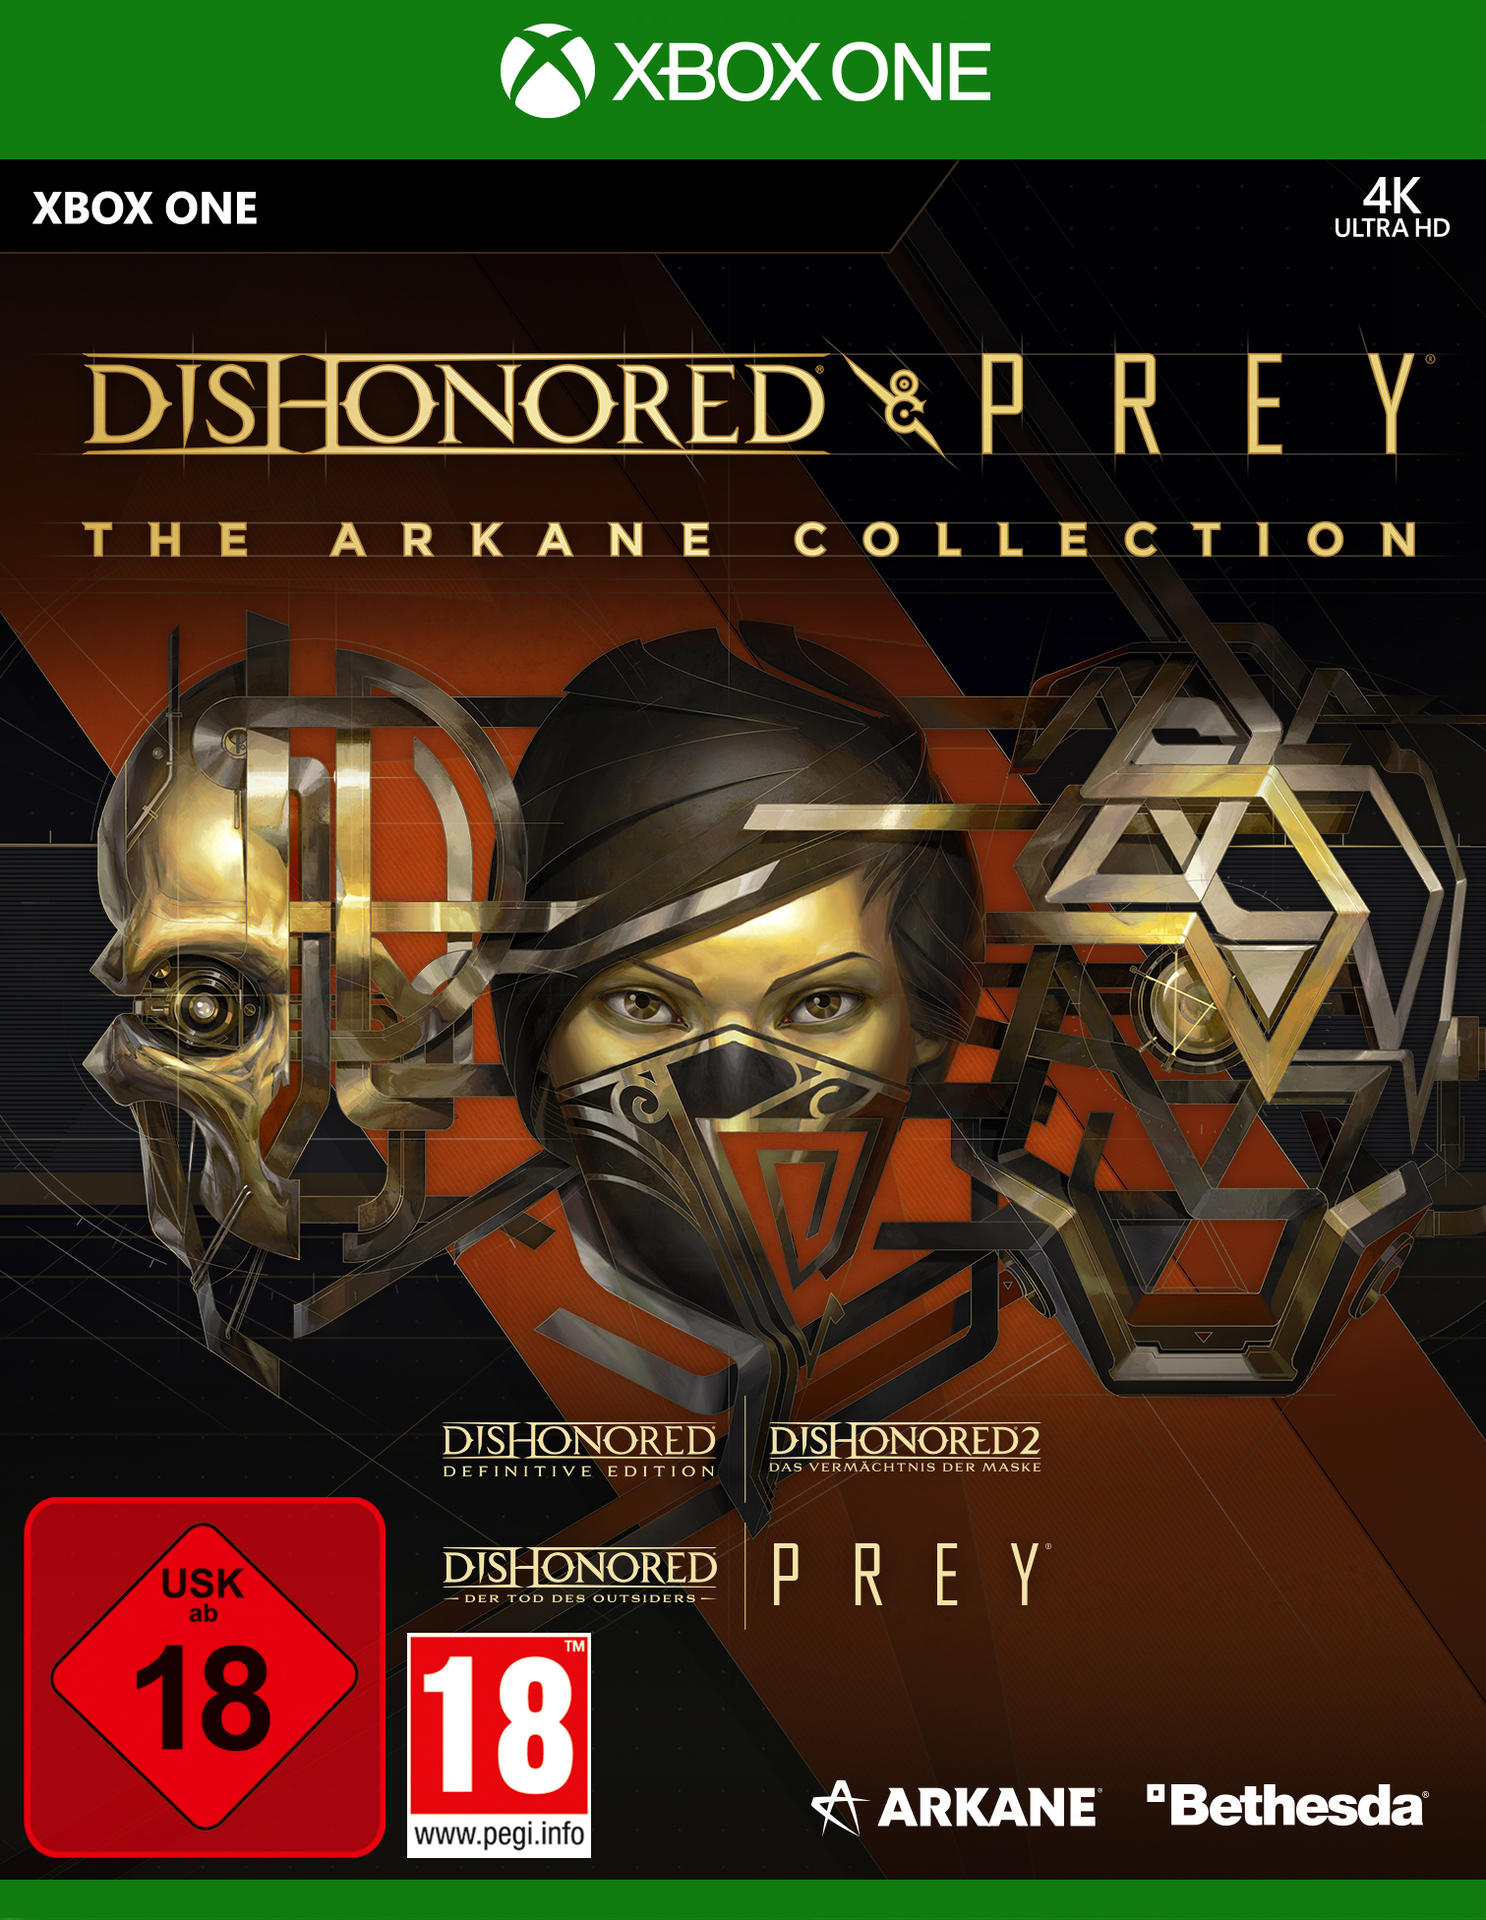 The Arkane [Xbox & One] Collection: Dishonored Prey 